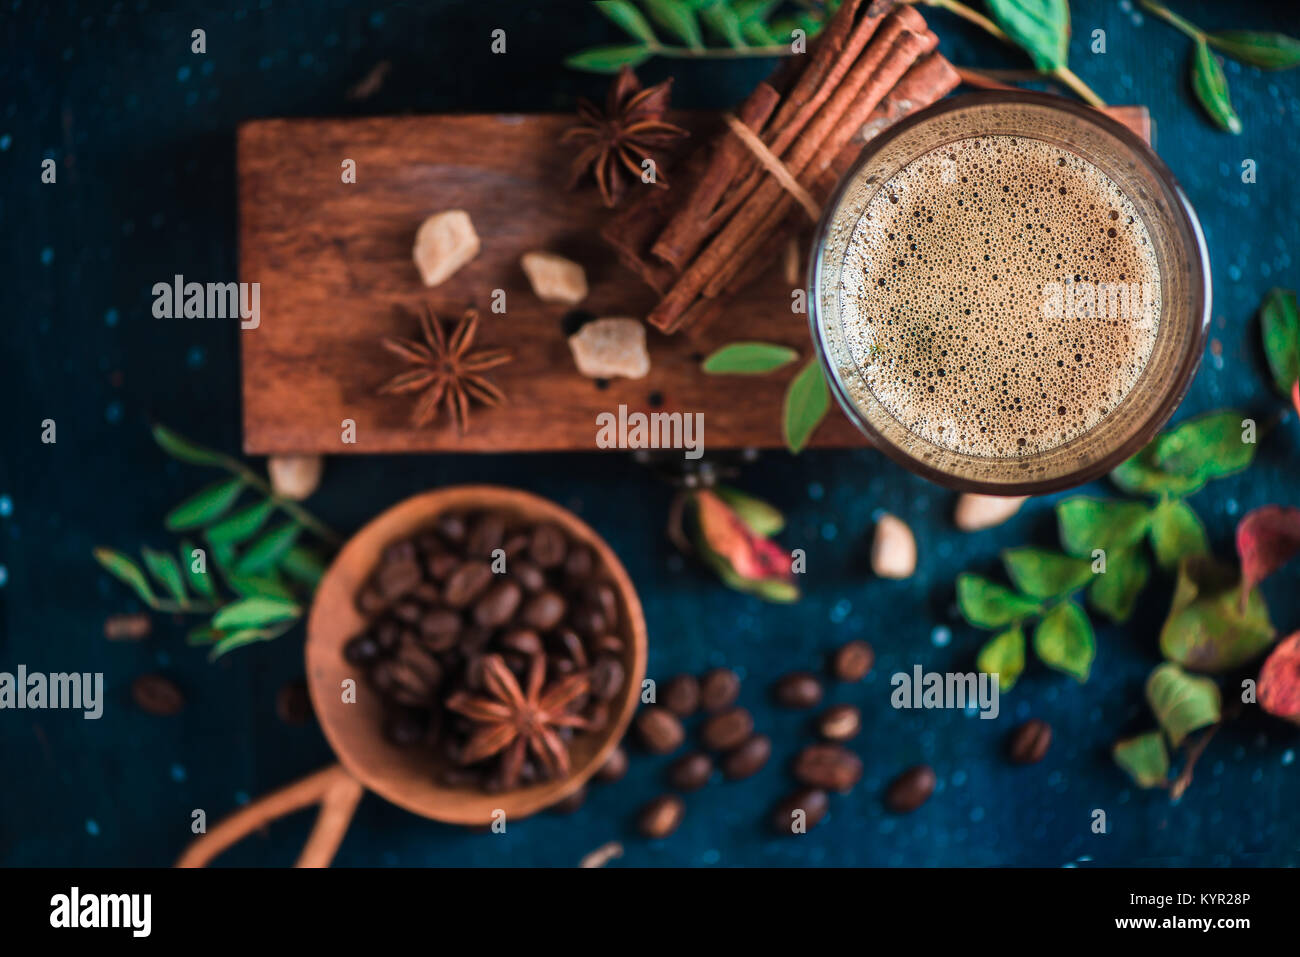 Close-up of espresso shot with foam on a wooden box, coffee beans, arabica leaves, cinnamon and spices on dark background. Hot drink photography conce Stock Photo